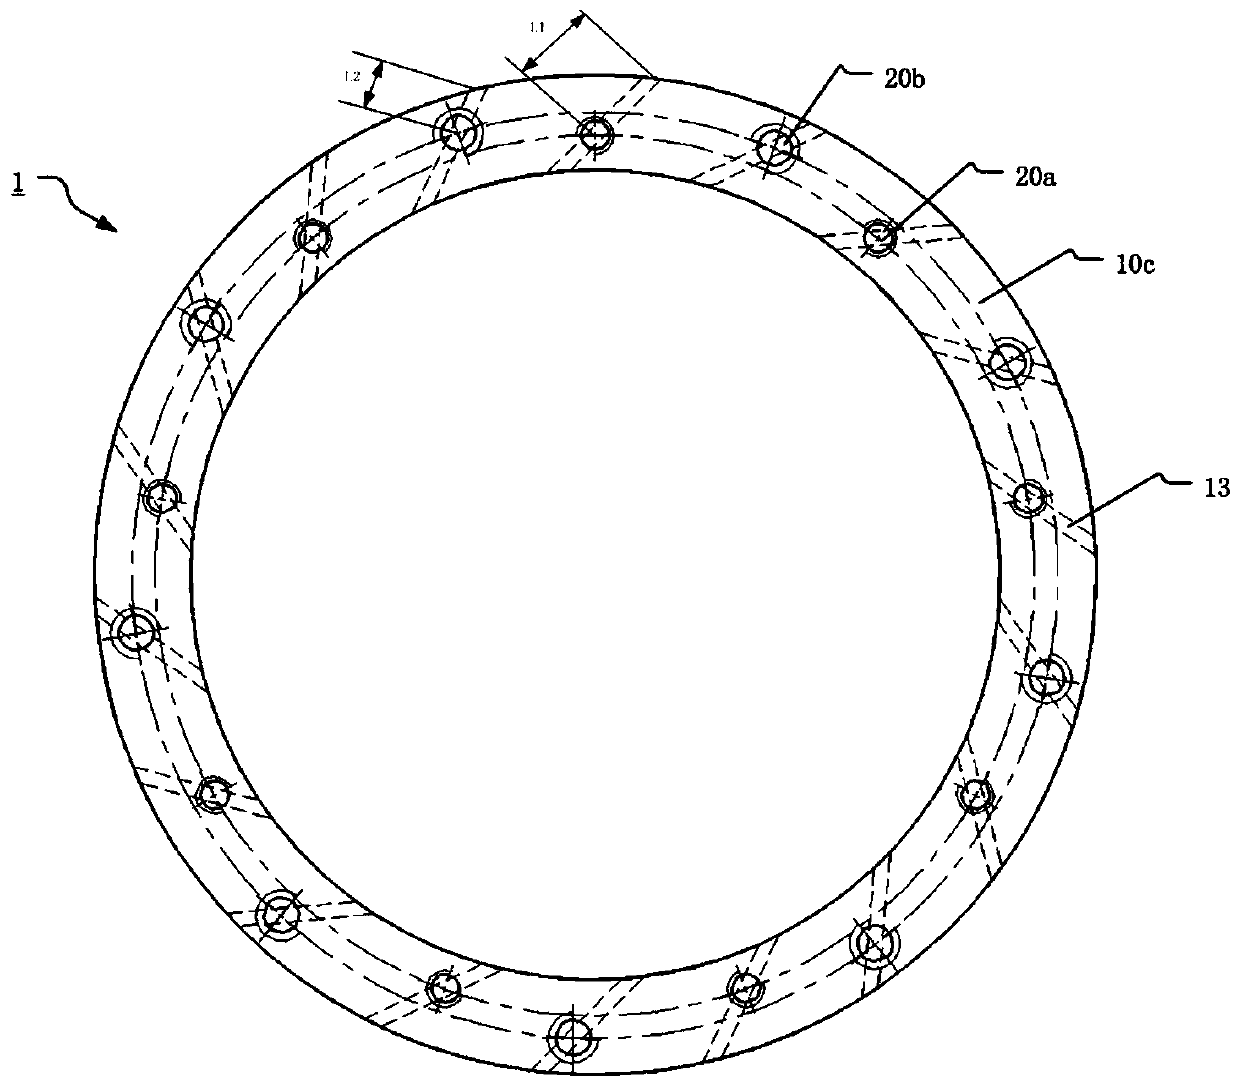 Retaining ring and carrier head for chemical mechanical polishing